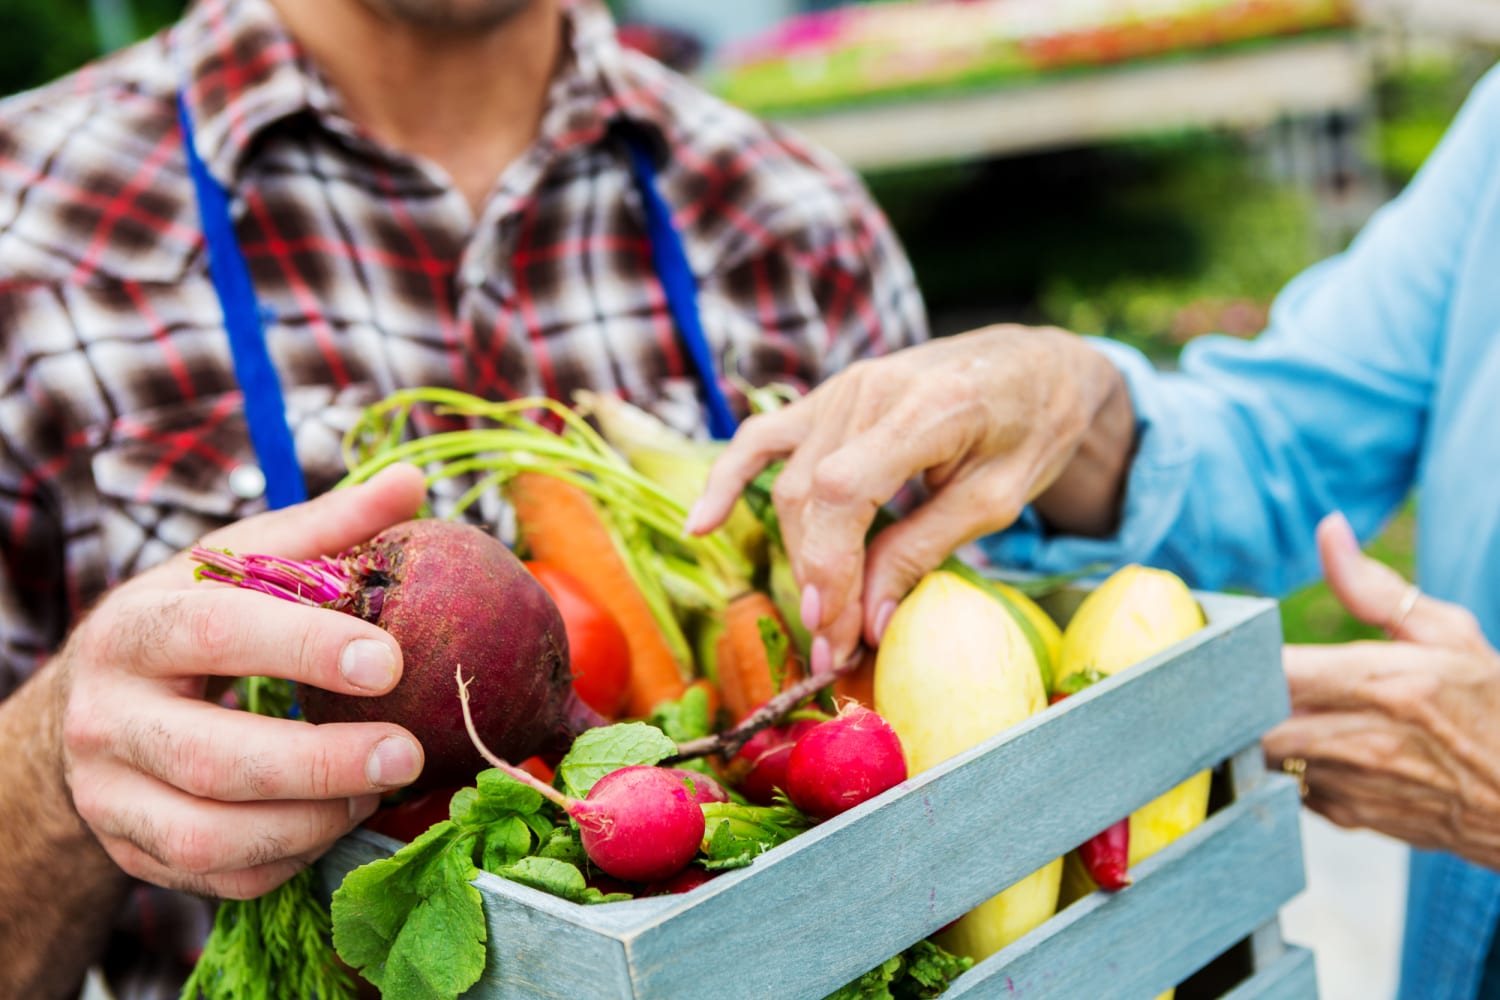 What a nutritionist wants you to know about pesticides and produce